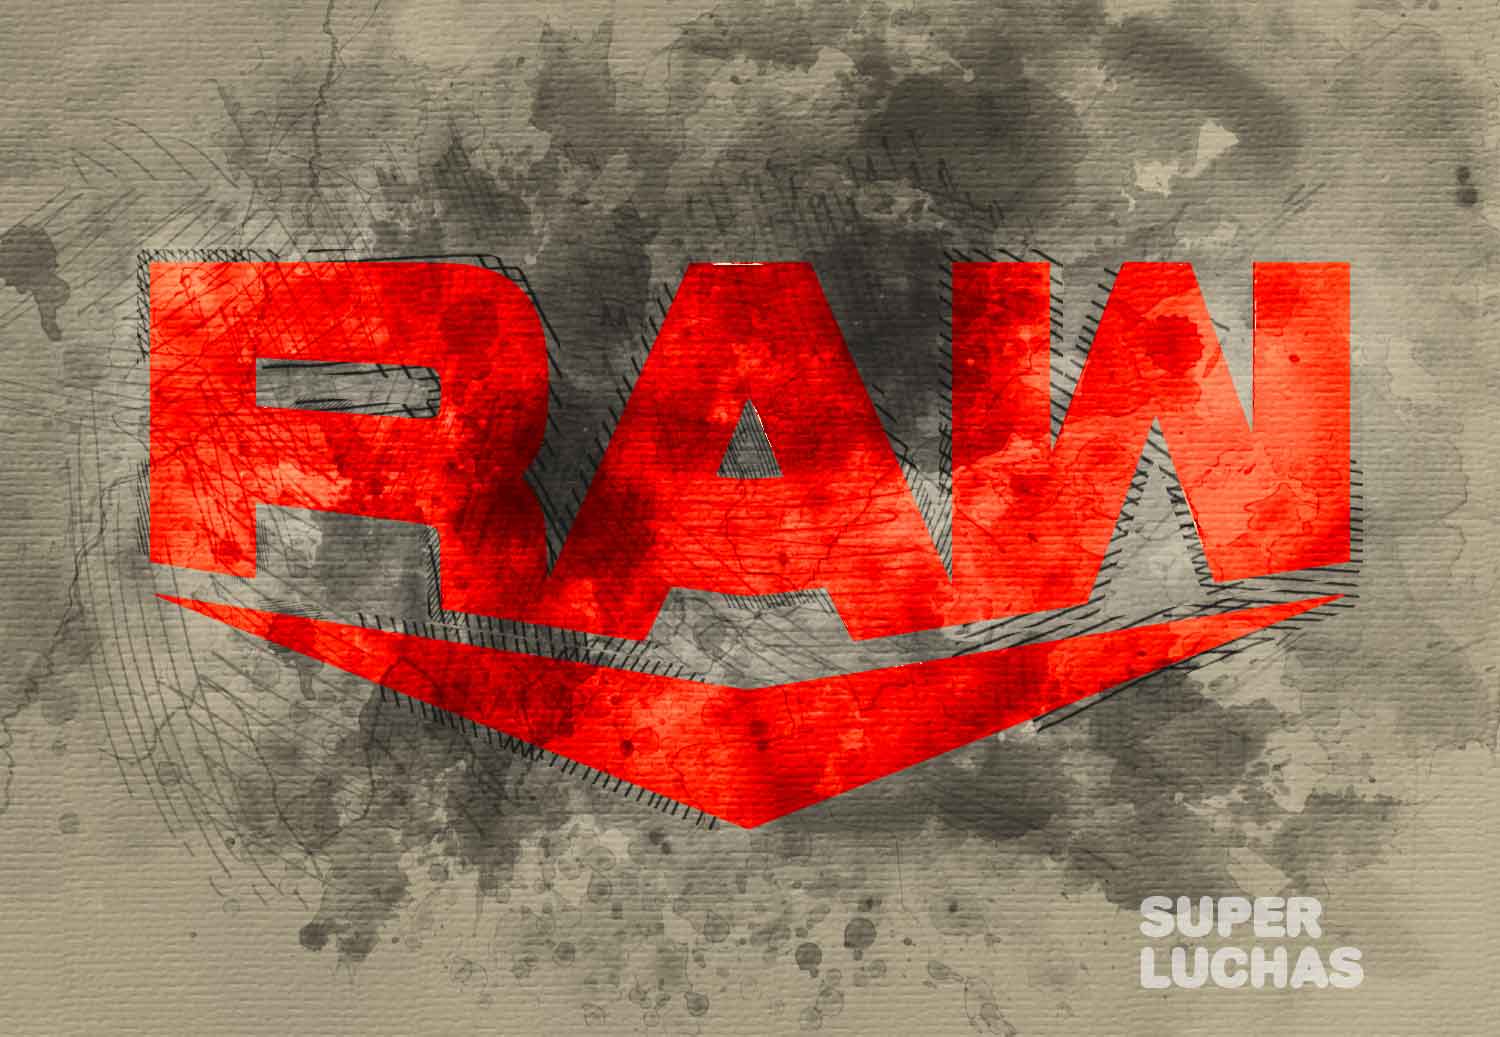 1642547651 WWE Raw will leave USA Network temporarily Superfights